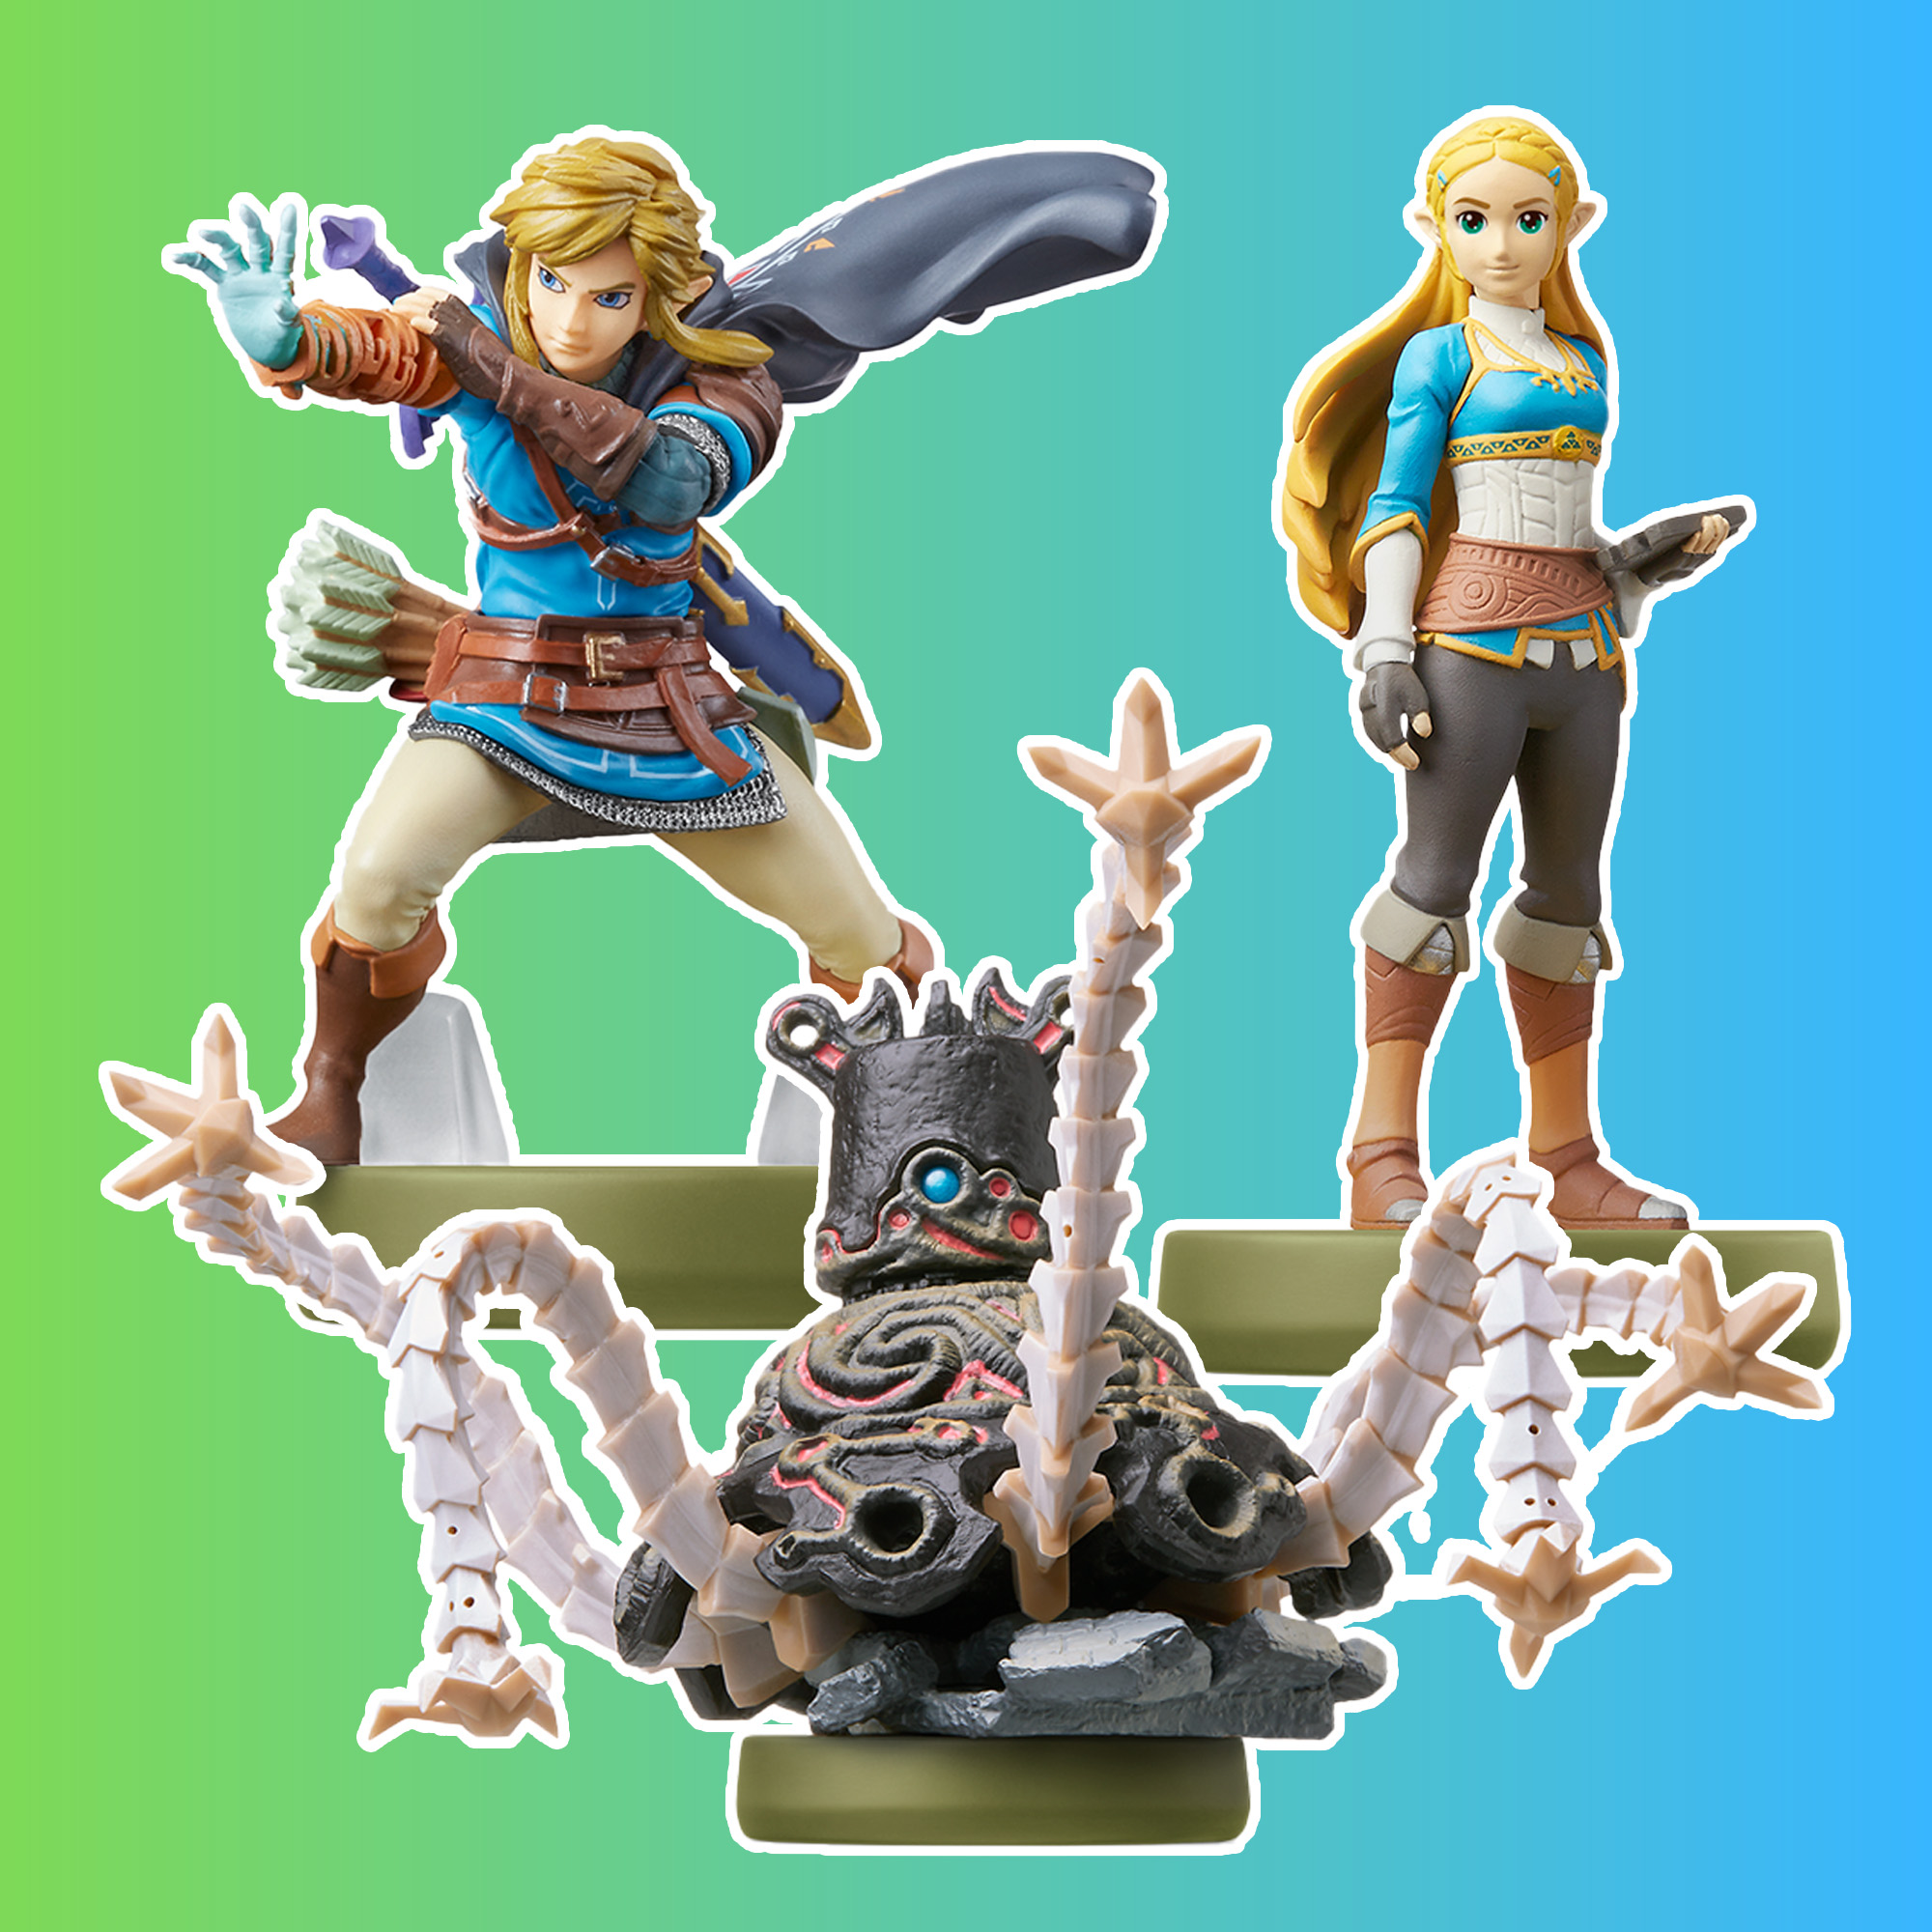 Zelda: Tears of the Kingdom - Every Confirmed Amiibo (& What They All Do)